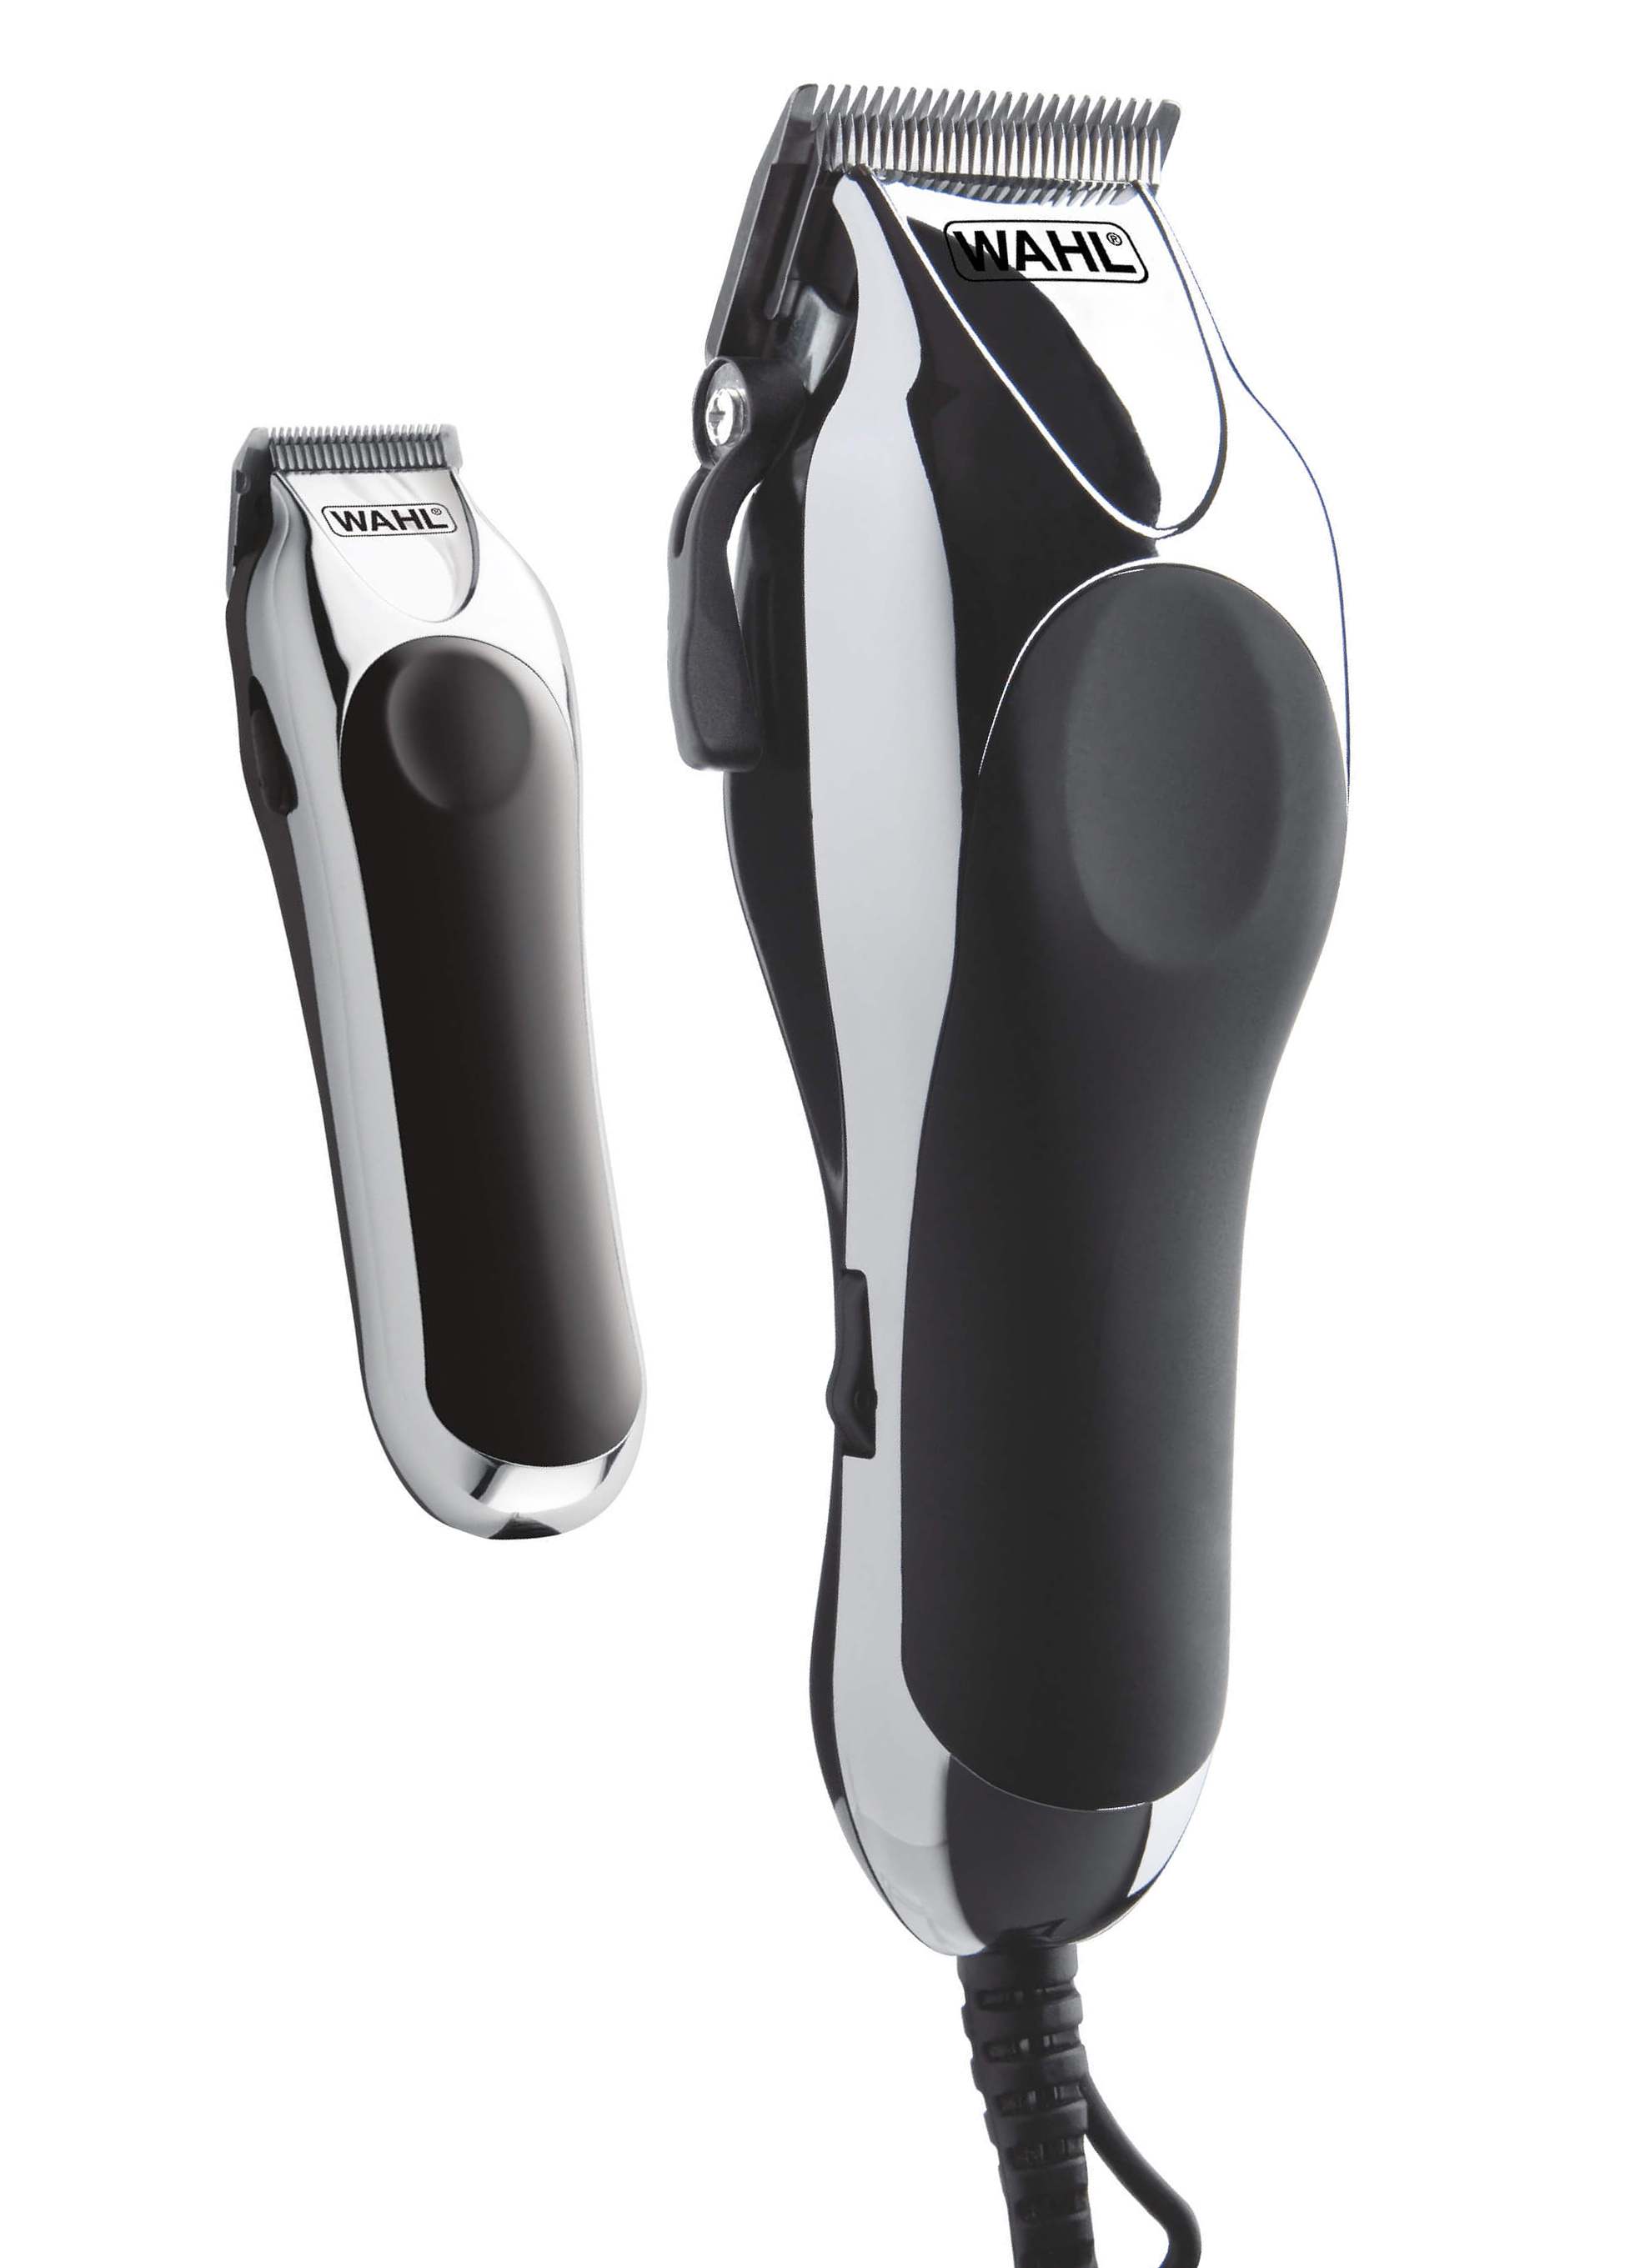 wahl deluxe chrome pro hair clippers